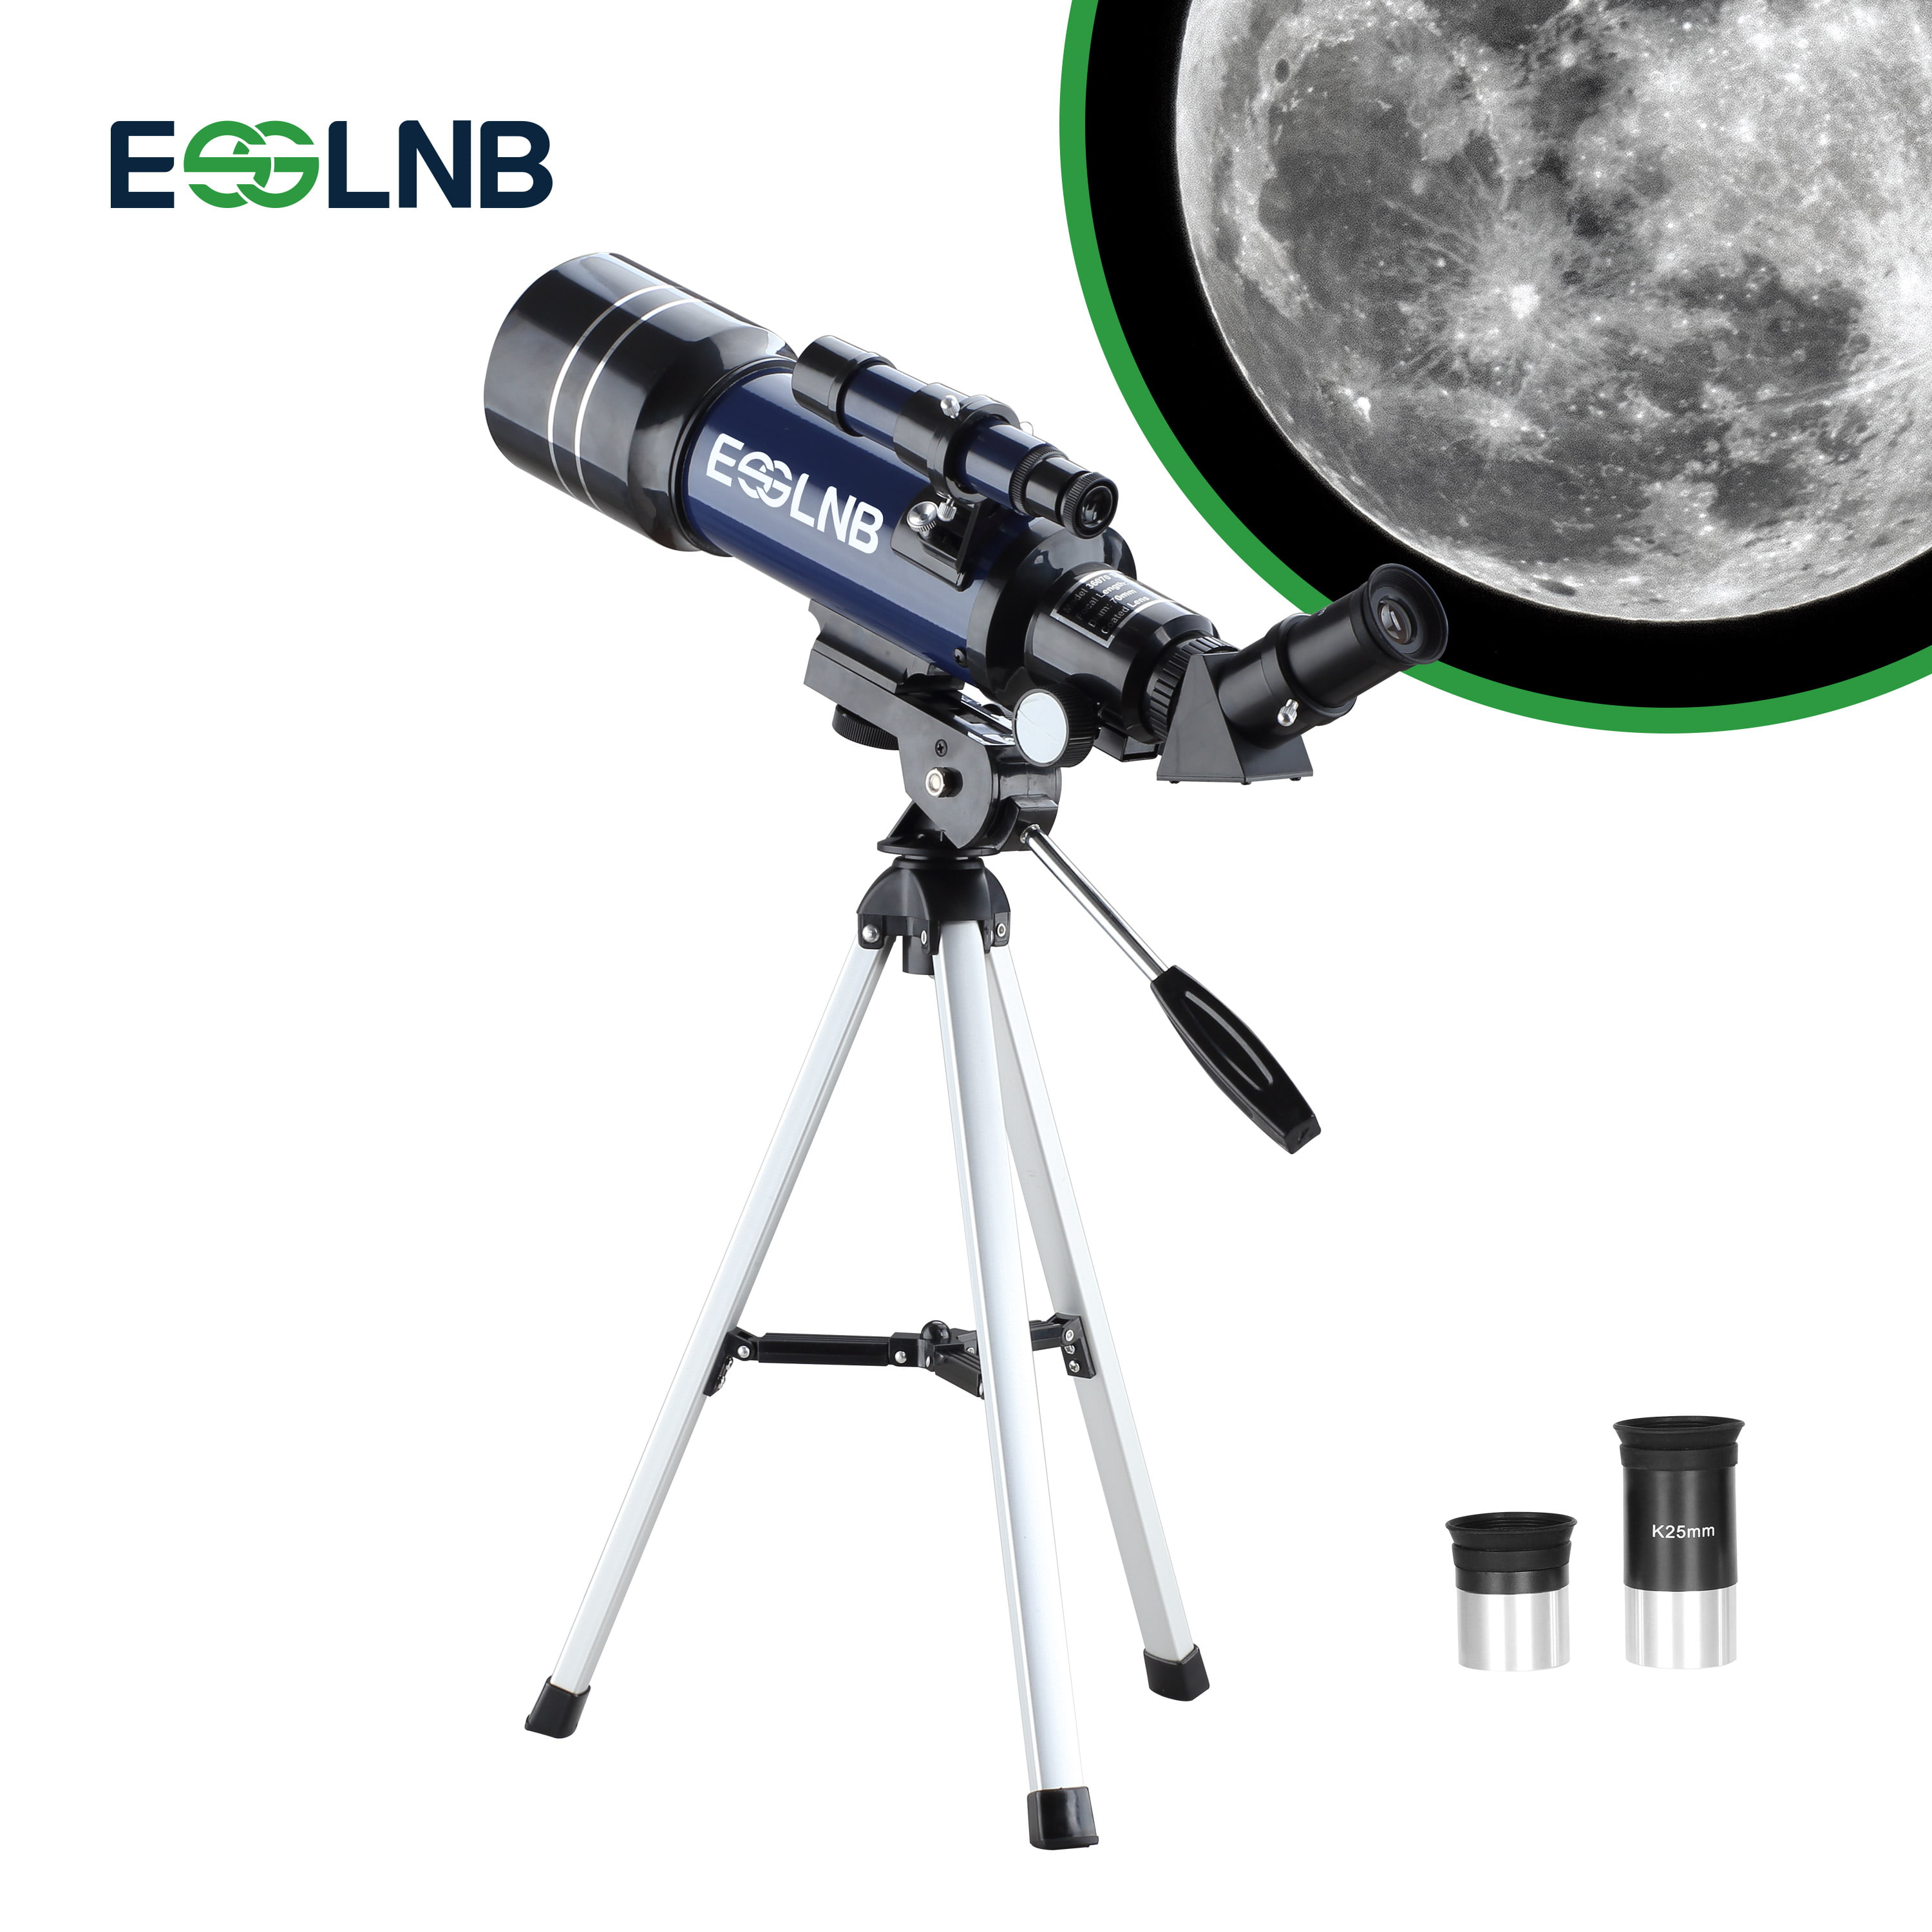 Phone Adapter Wire Shutter 70mm Starter Scope with Tripod 150X HD Refractor Telescope for Astronomy Moon Filter Telescope for Kids Adults Astronomy Beginners 